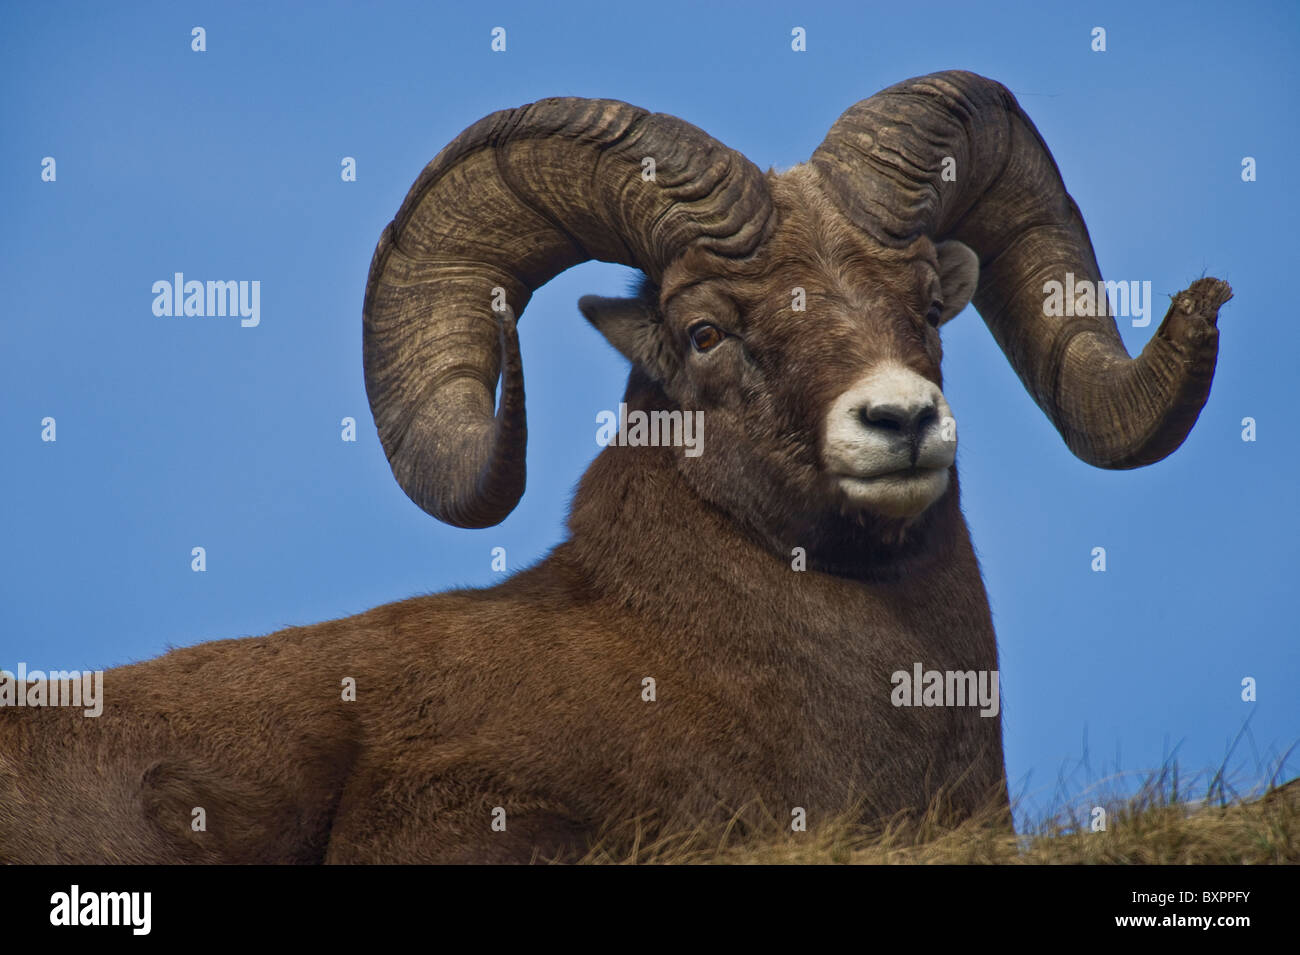 A close up portrait image of a Bighorn Sheep Stock Photo